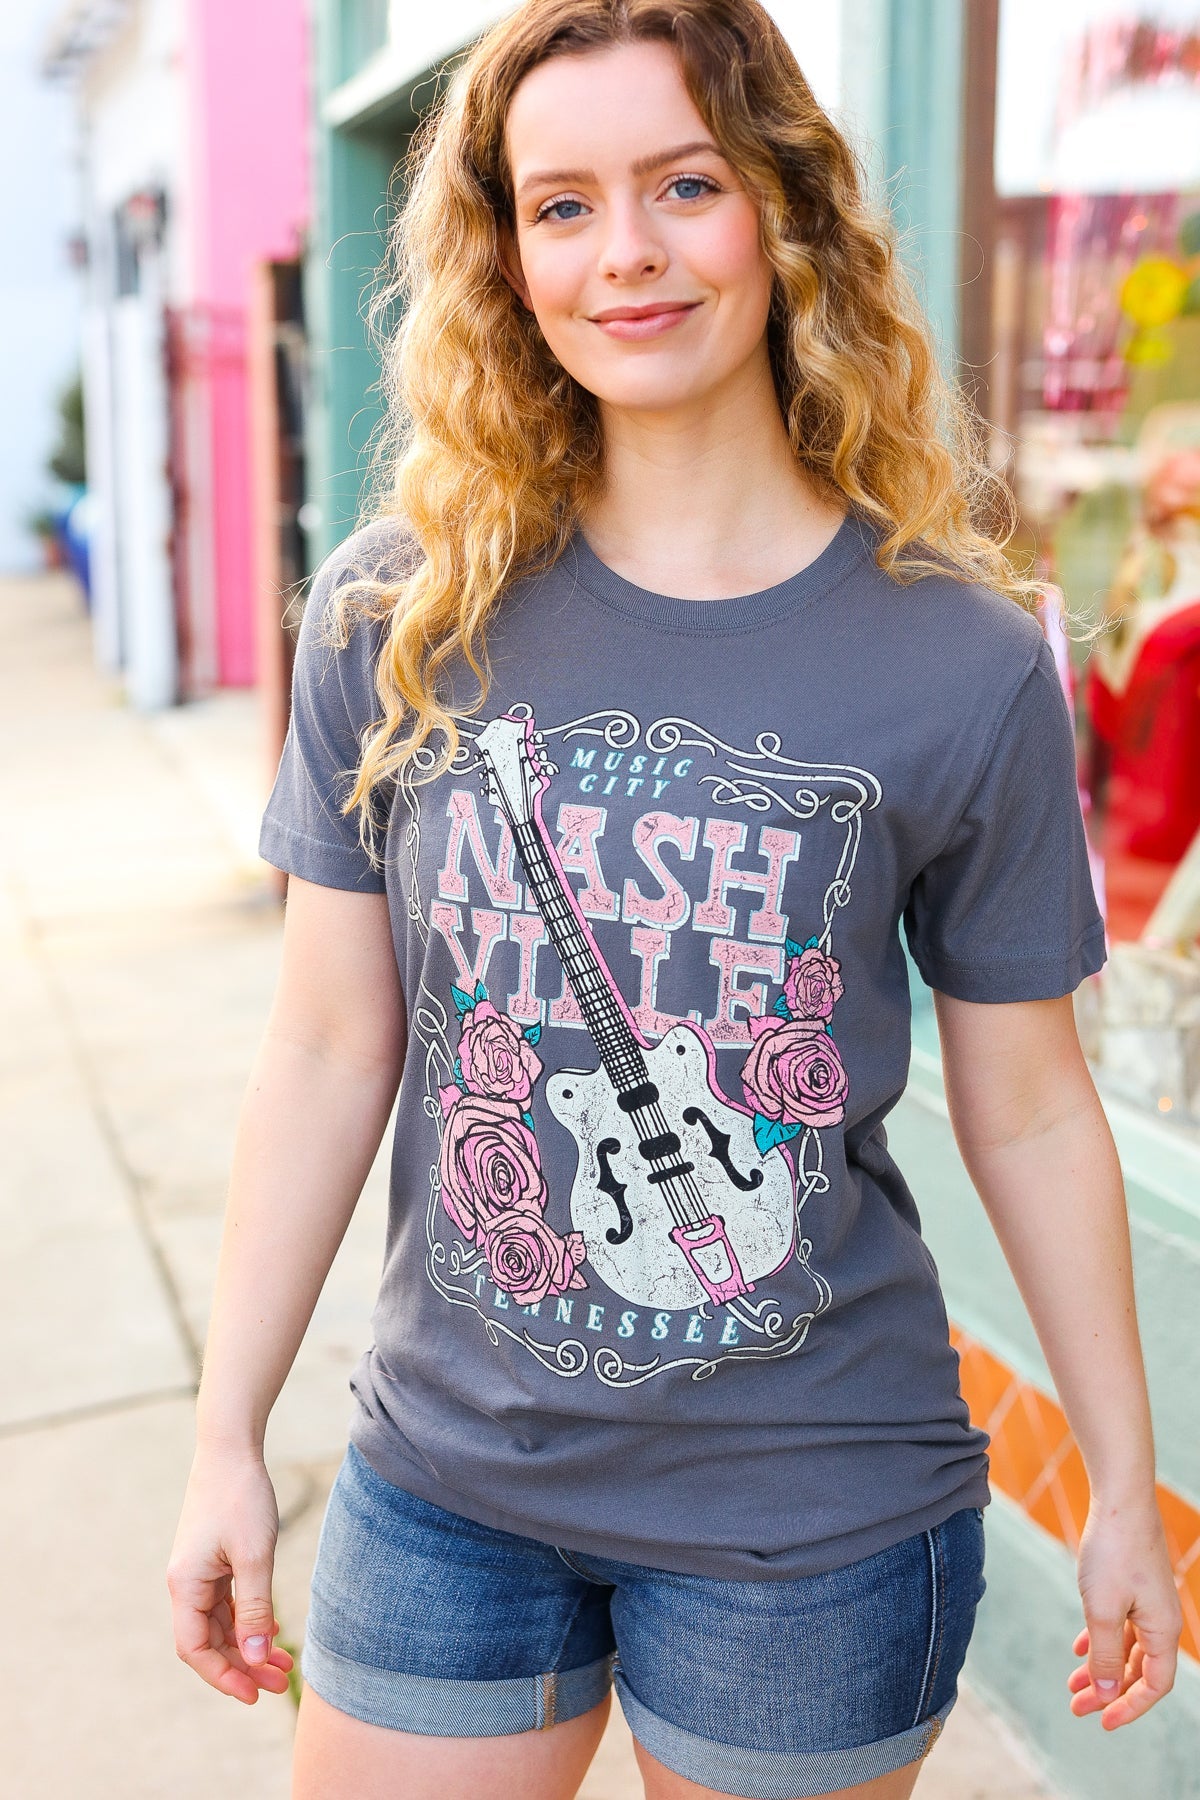 Grey Cotton NASHVILLE Tennessee Graphic Tee BOU TEE QUE